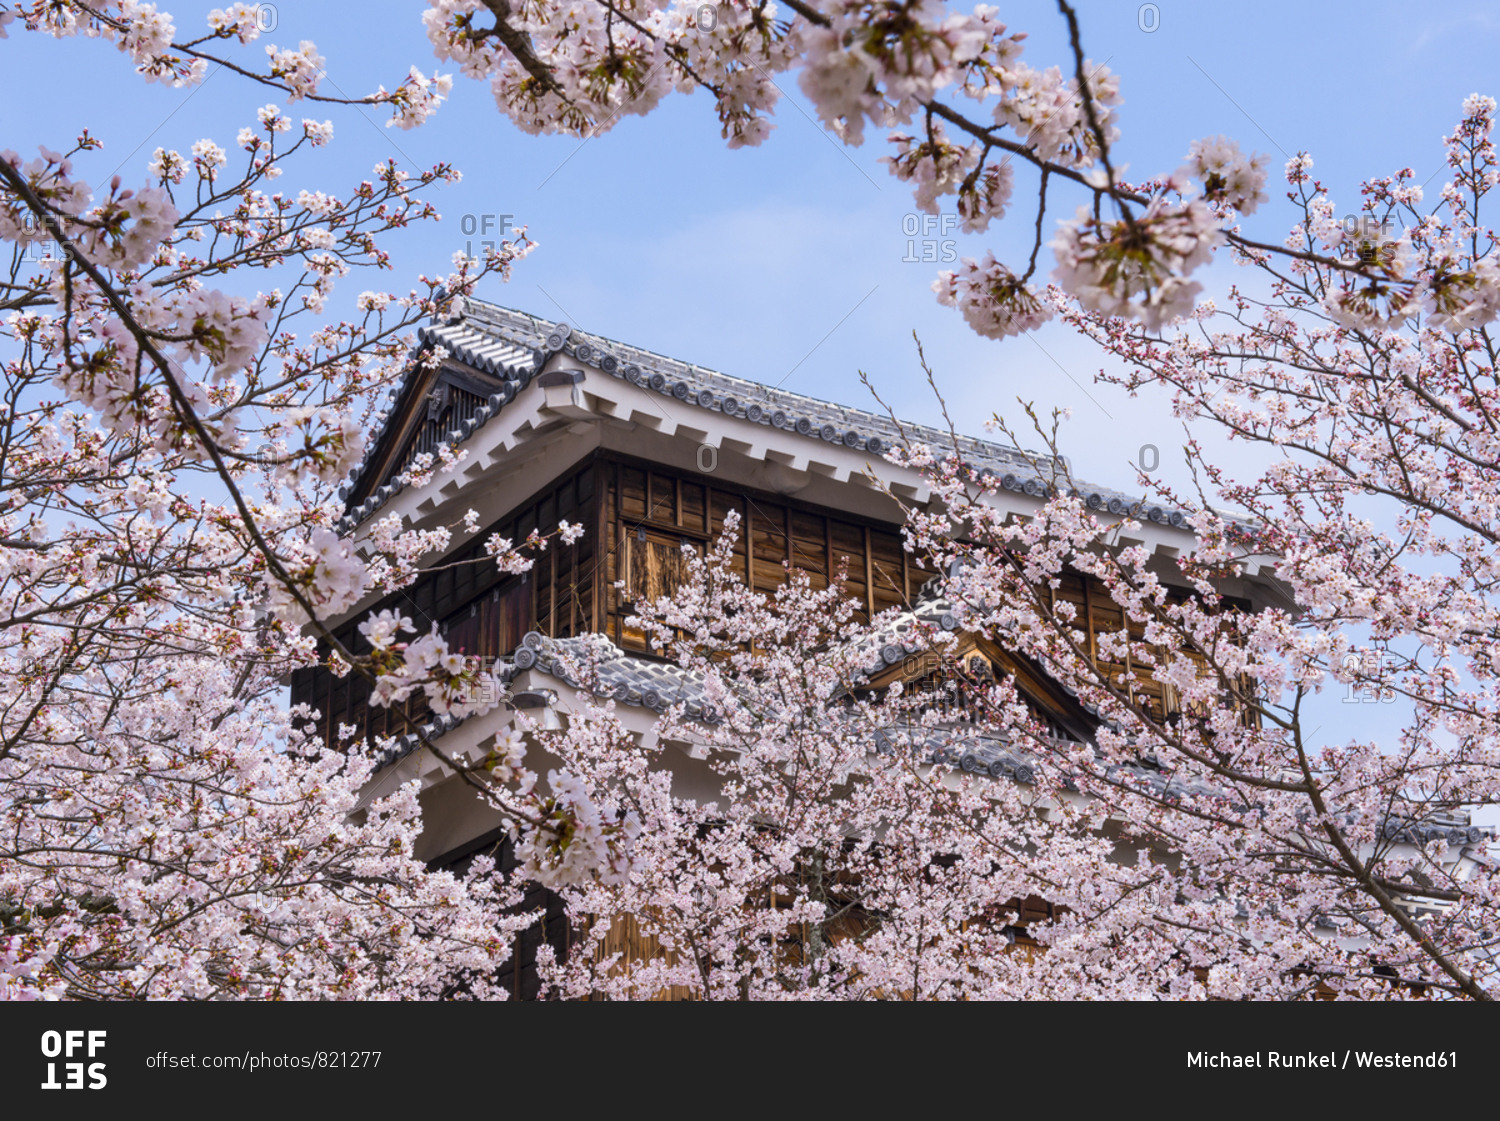 Japan- Shikoku- Matsuyama- view to Matsuyama castle with pink cherry blossoms in the foreground